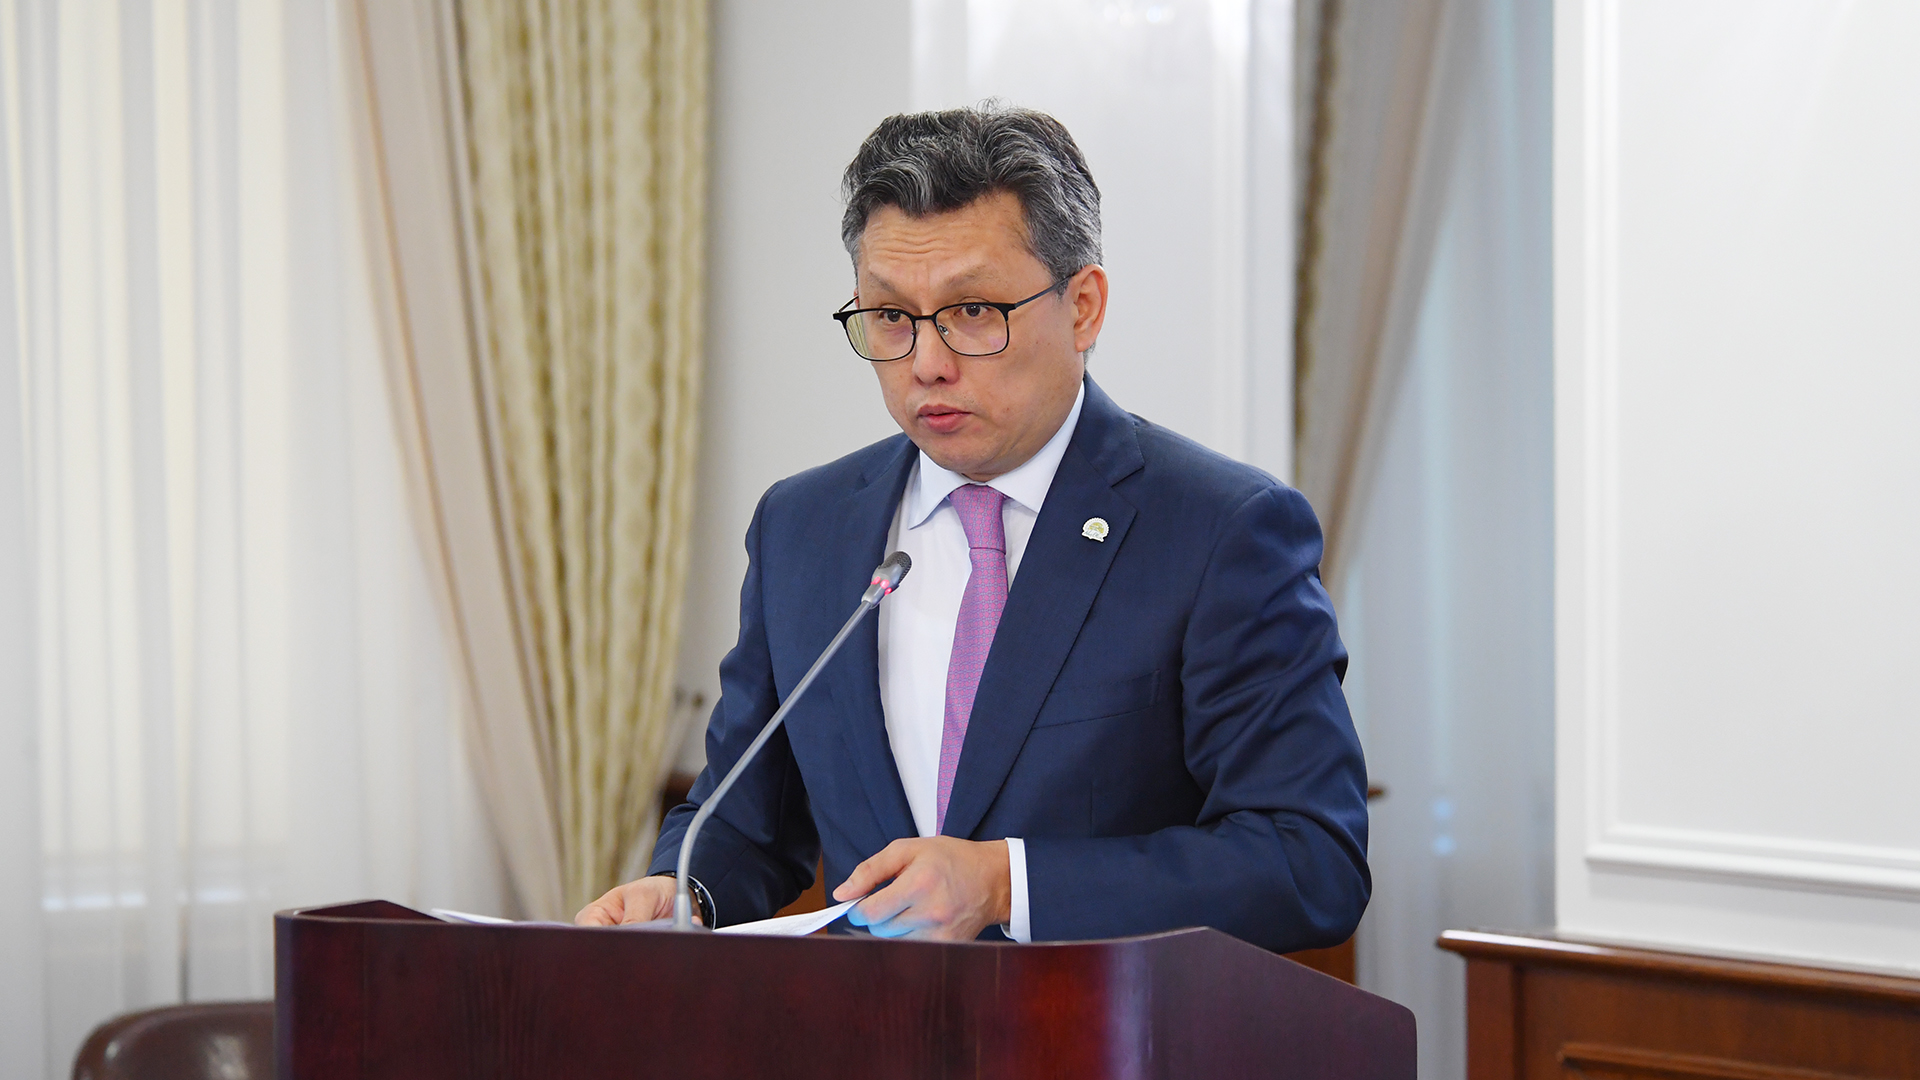 Purchases in online stores in Kazakhstan amounted to 422 billion tenge